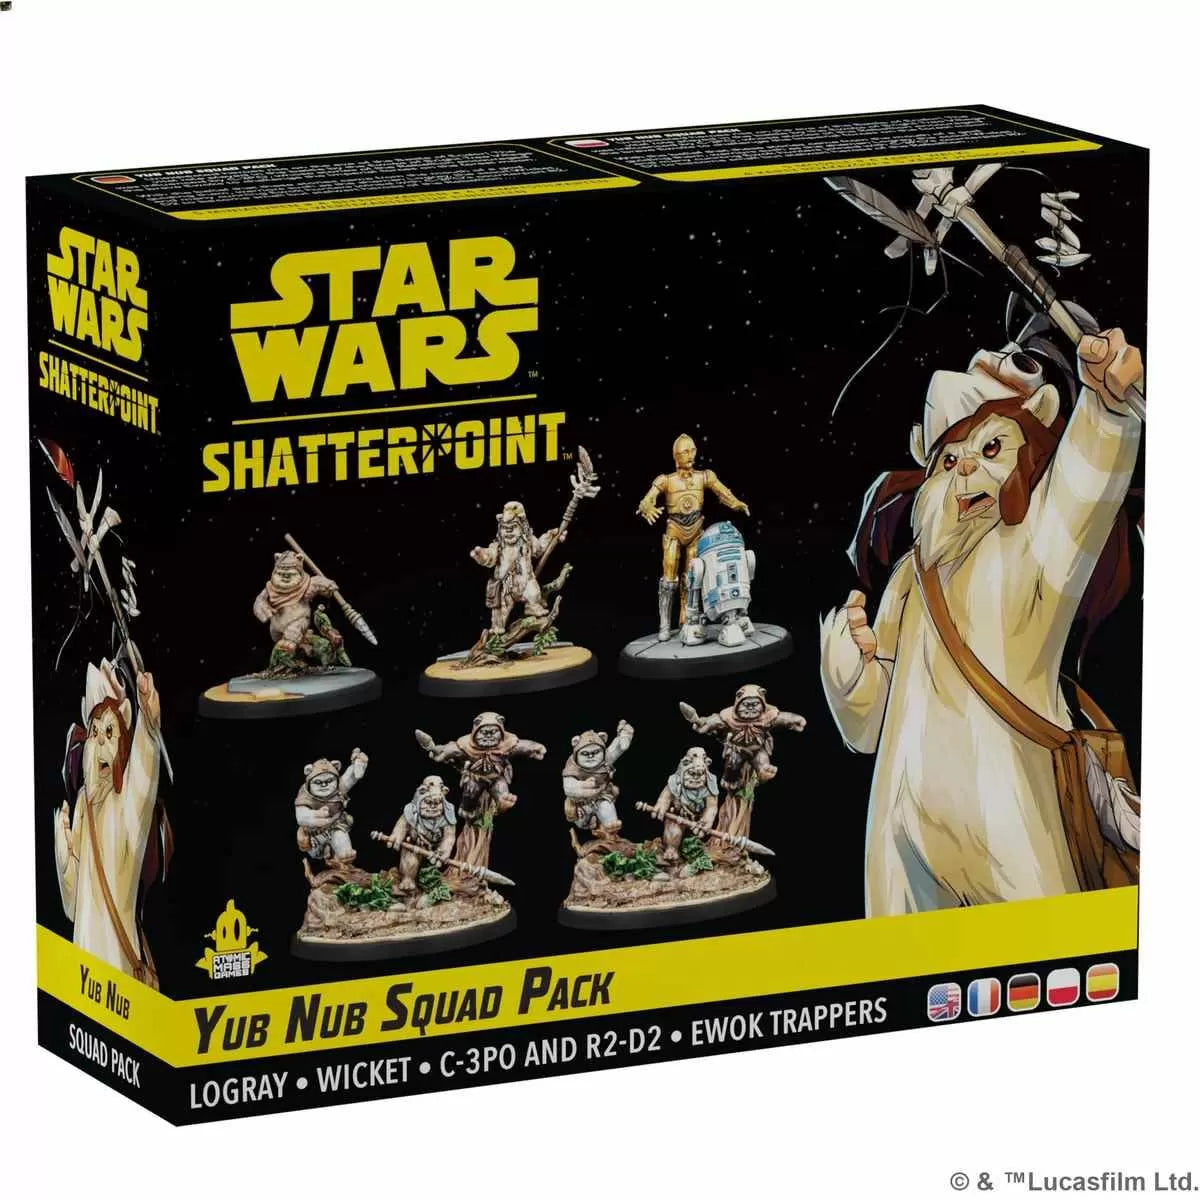 Star Wars Shatterpoint: Yub Nub Logray Squad Pack